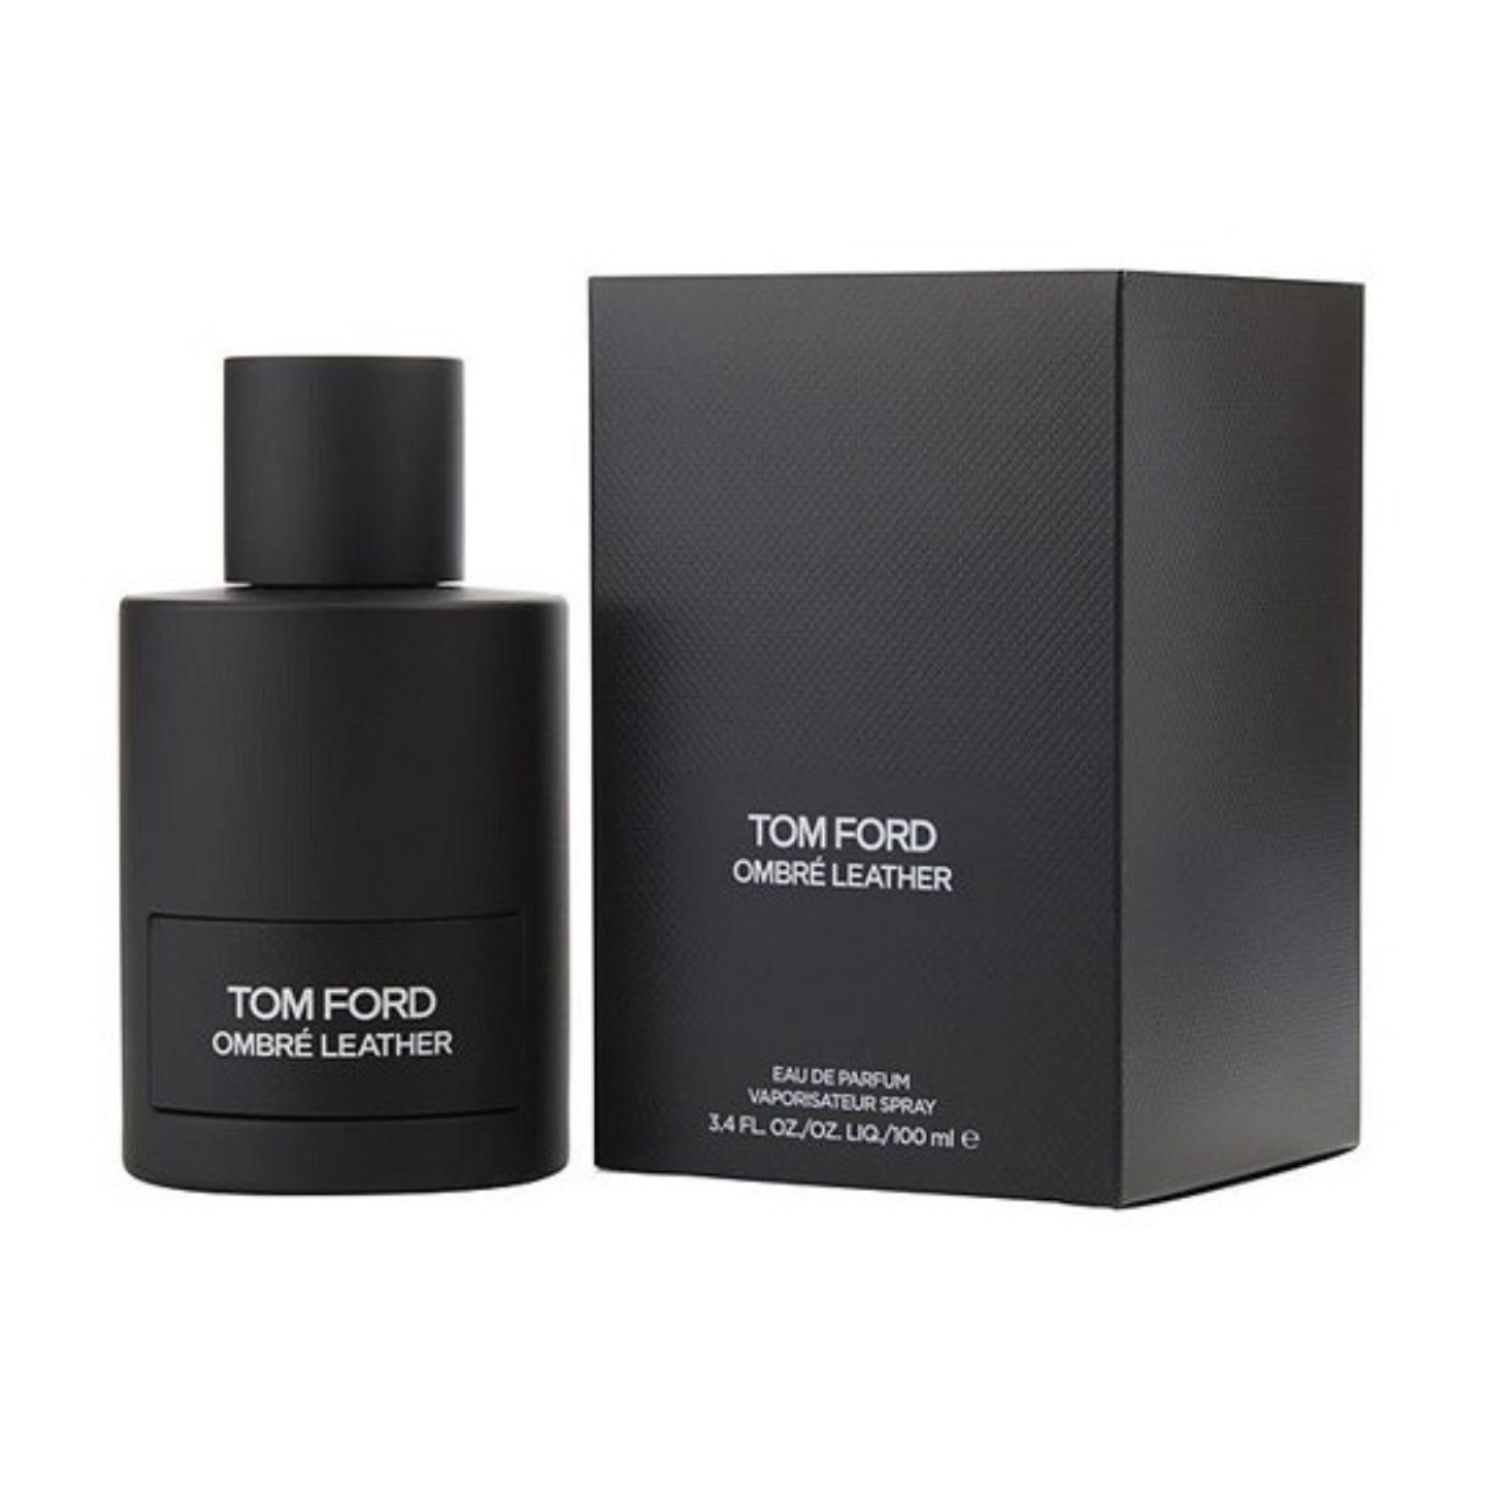 Tom Ford Ombre Leather EDP 100ml. Tom Ford Ombre Leather парфюмерная вода 100 мл. Tom Ford 100ml. Том Форд Ombre Leather EDP 100. Tom ford купить мужские